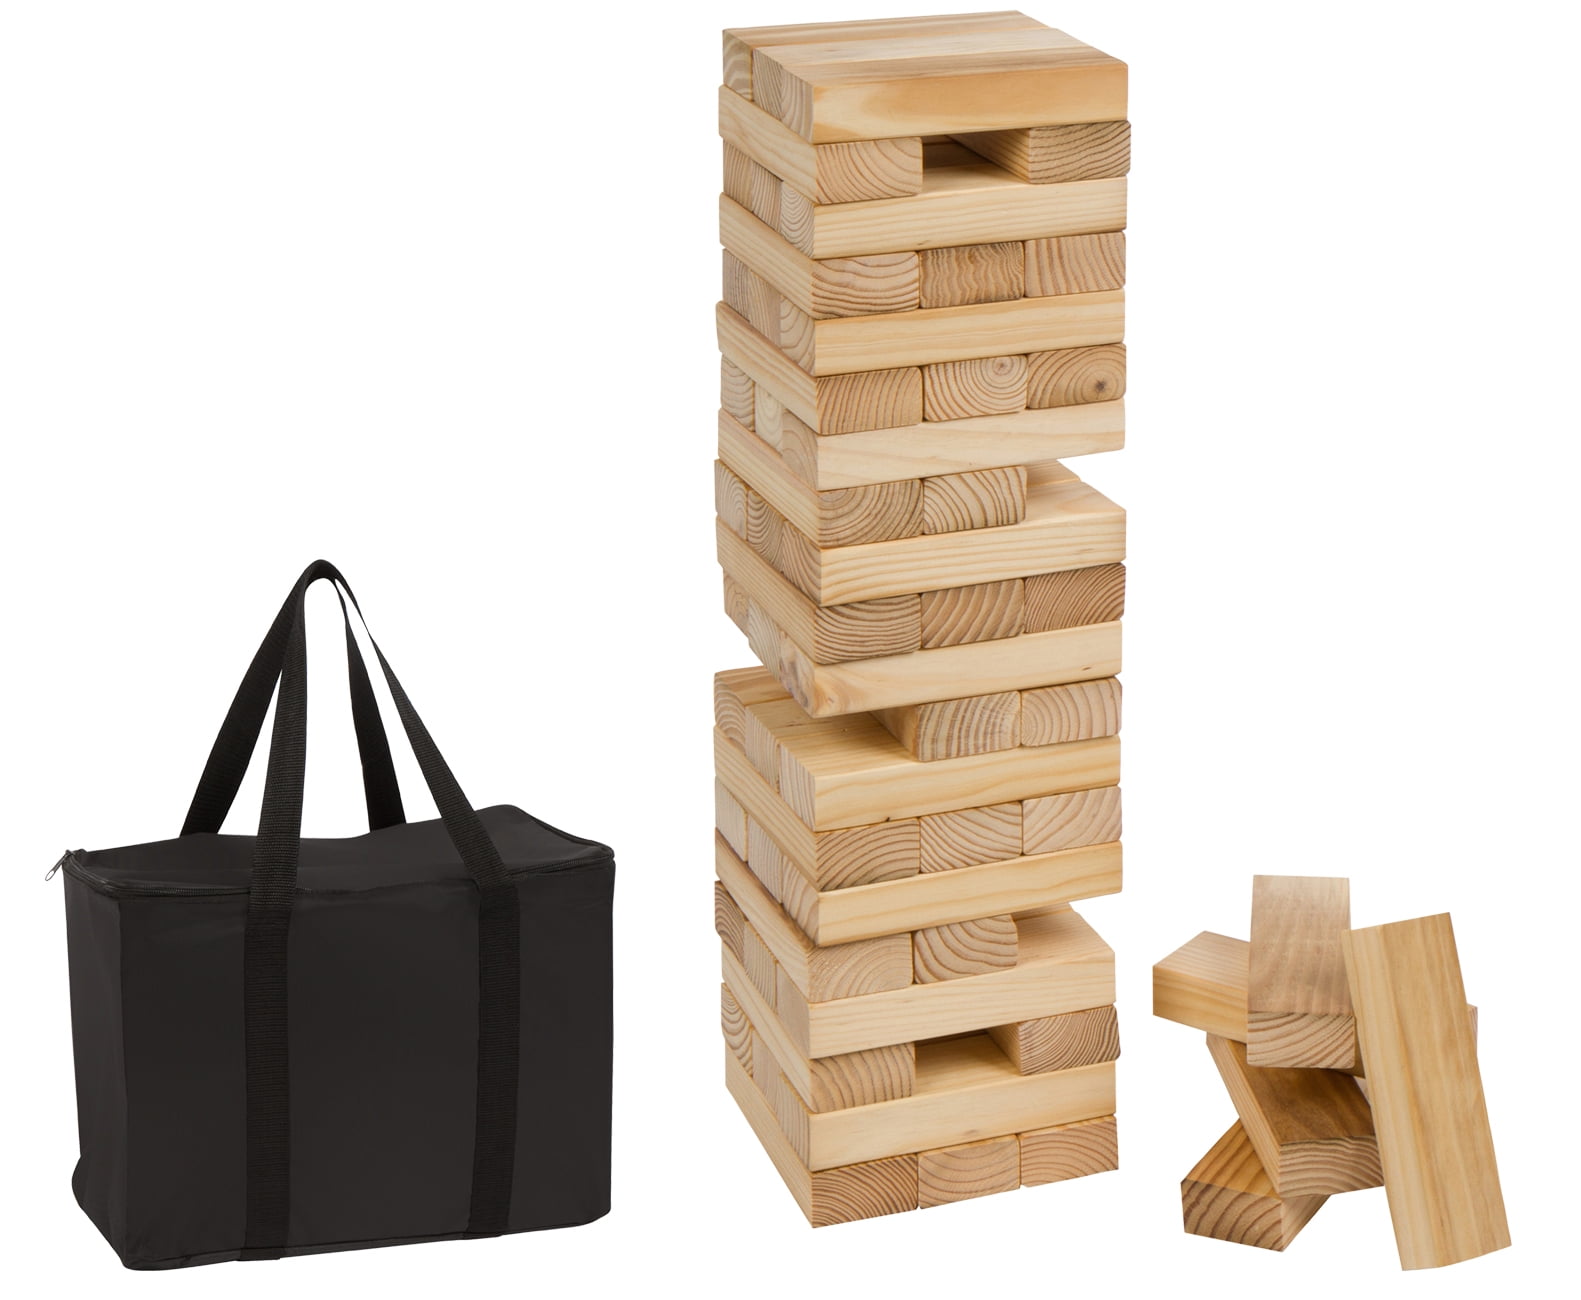 Trademark Innovations 90 Piece 3 Tall Giant Wooden Stacking Puzzle Game with Carry Case 